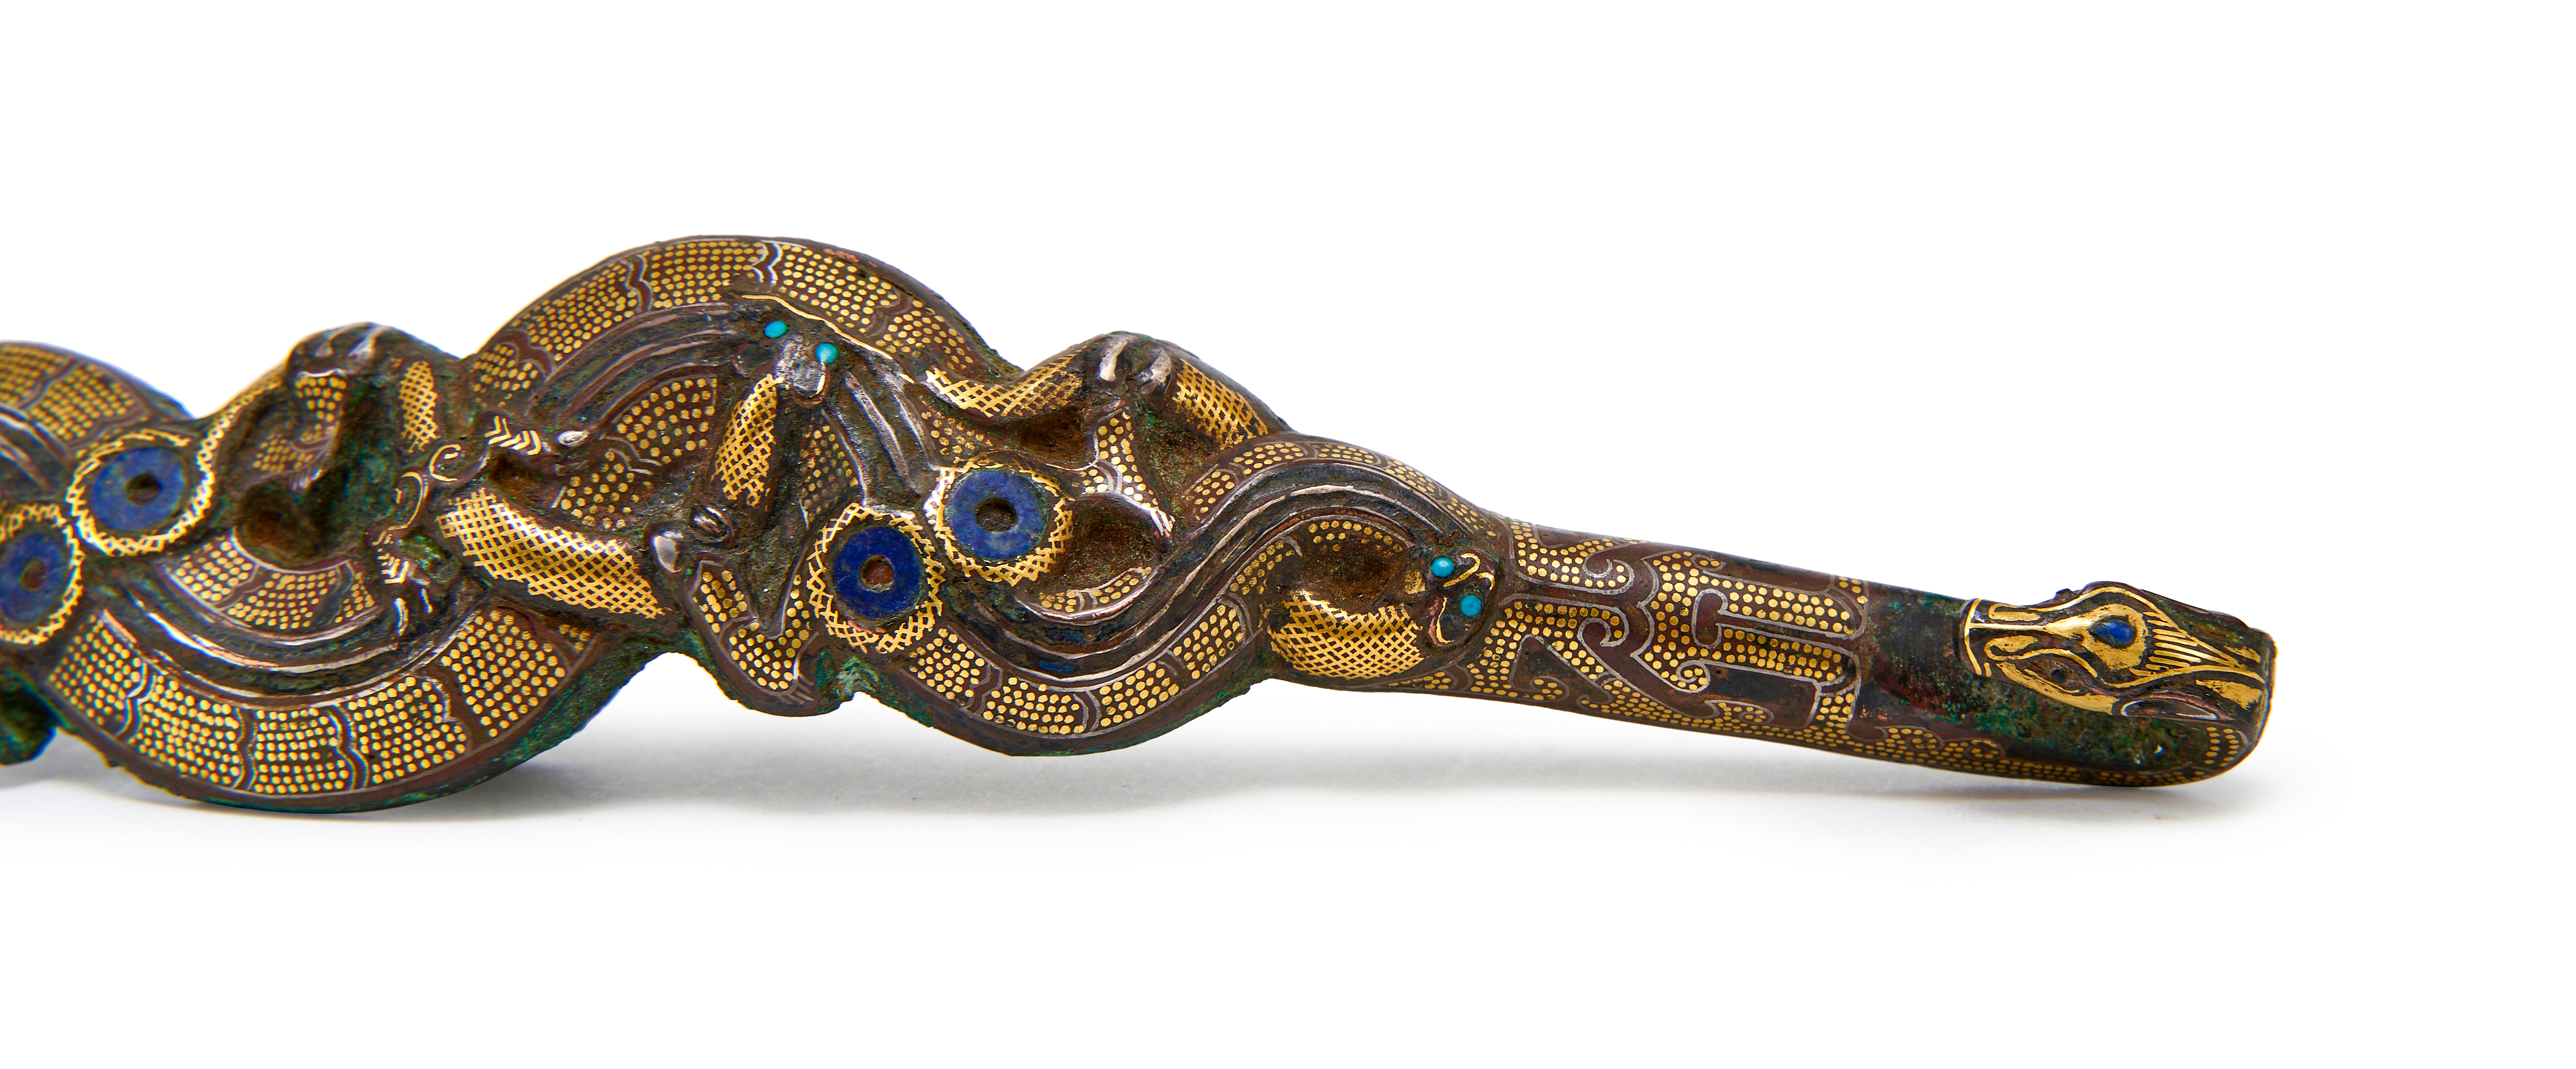 A TURQUOISE AND GOLD-INLAID BRONZE BELT HOOK WARRING STATES PERIOD, 4TH-3RD CENTURY BC - Image 6 of 9